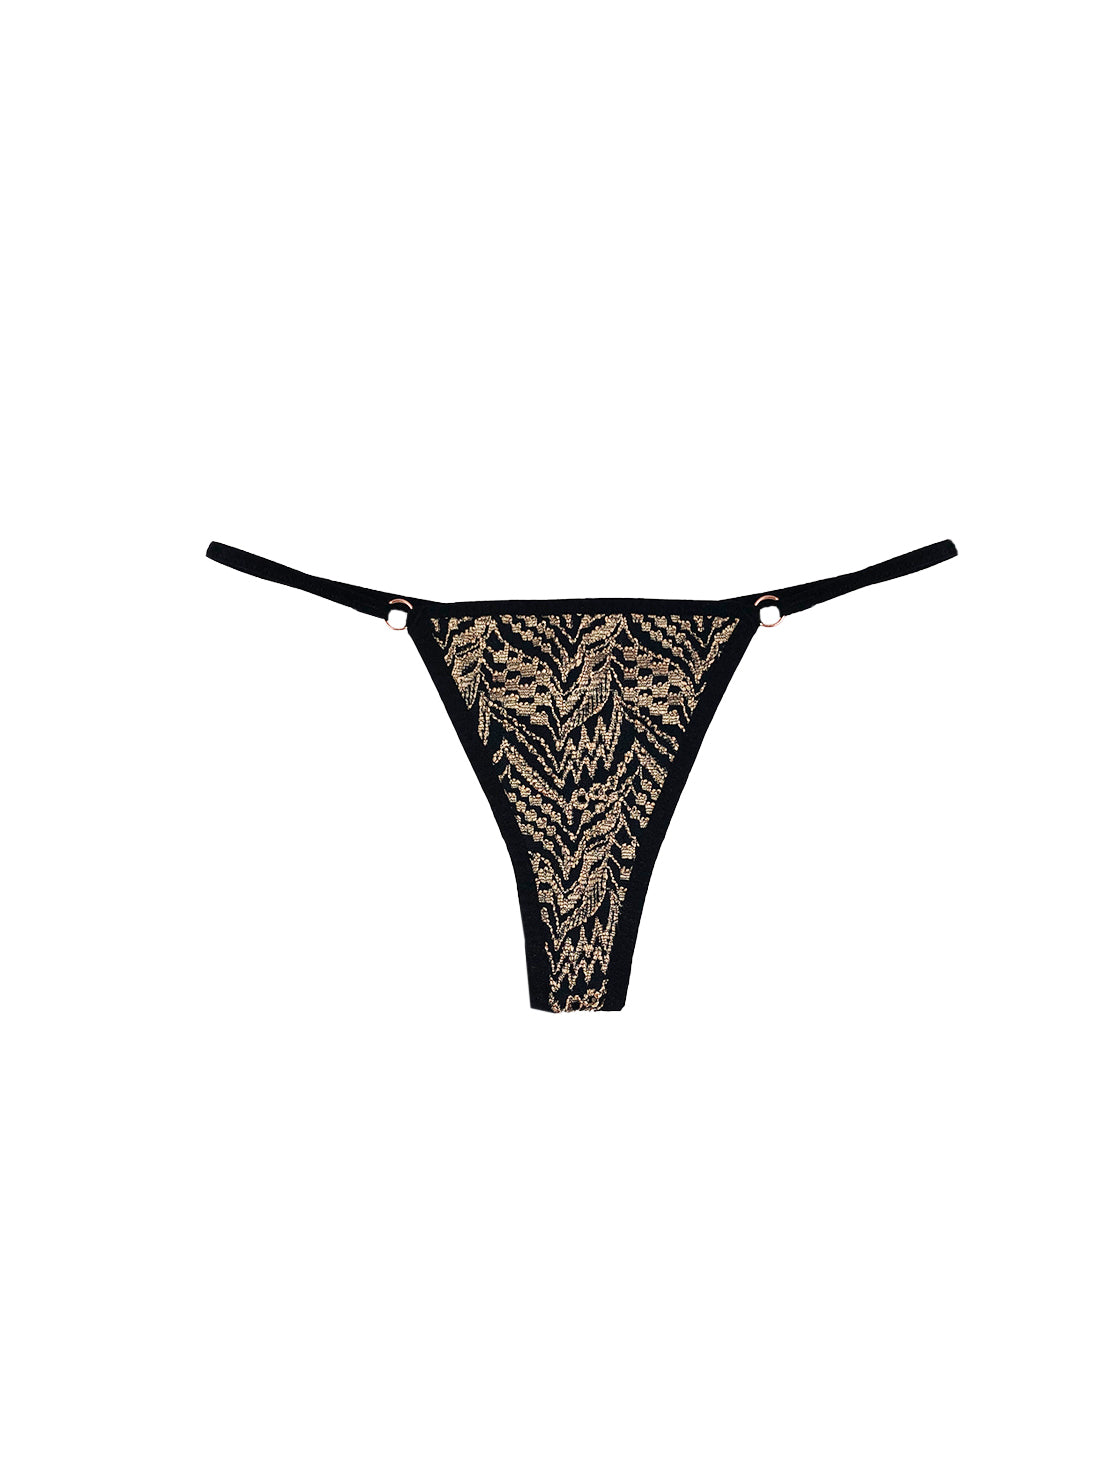 gold detailed on a black string underwear with a white background